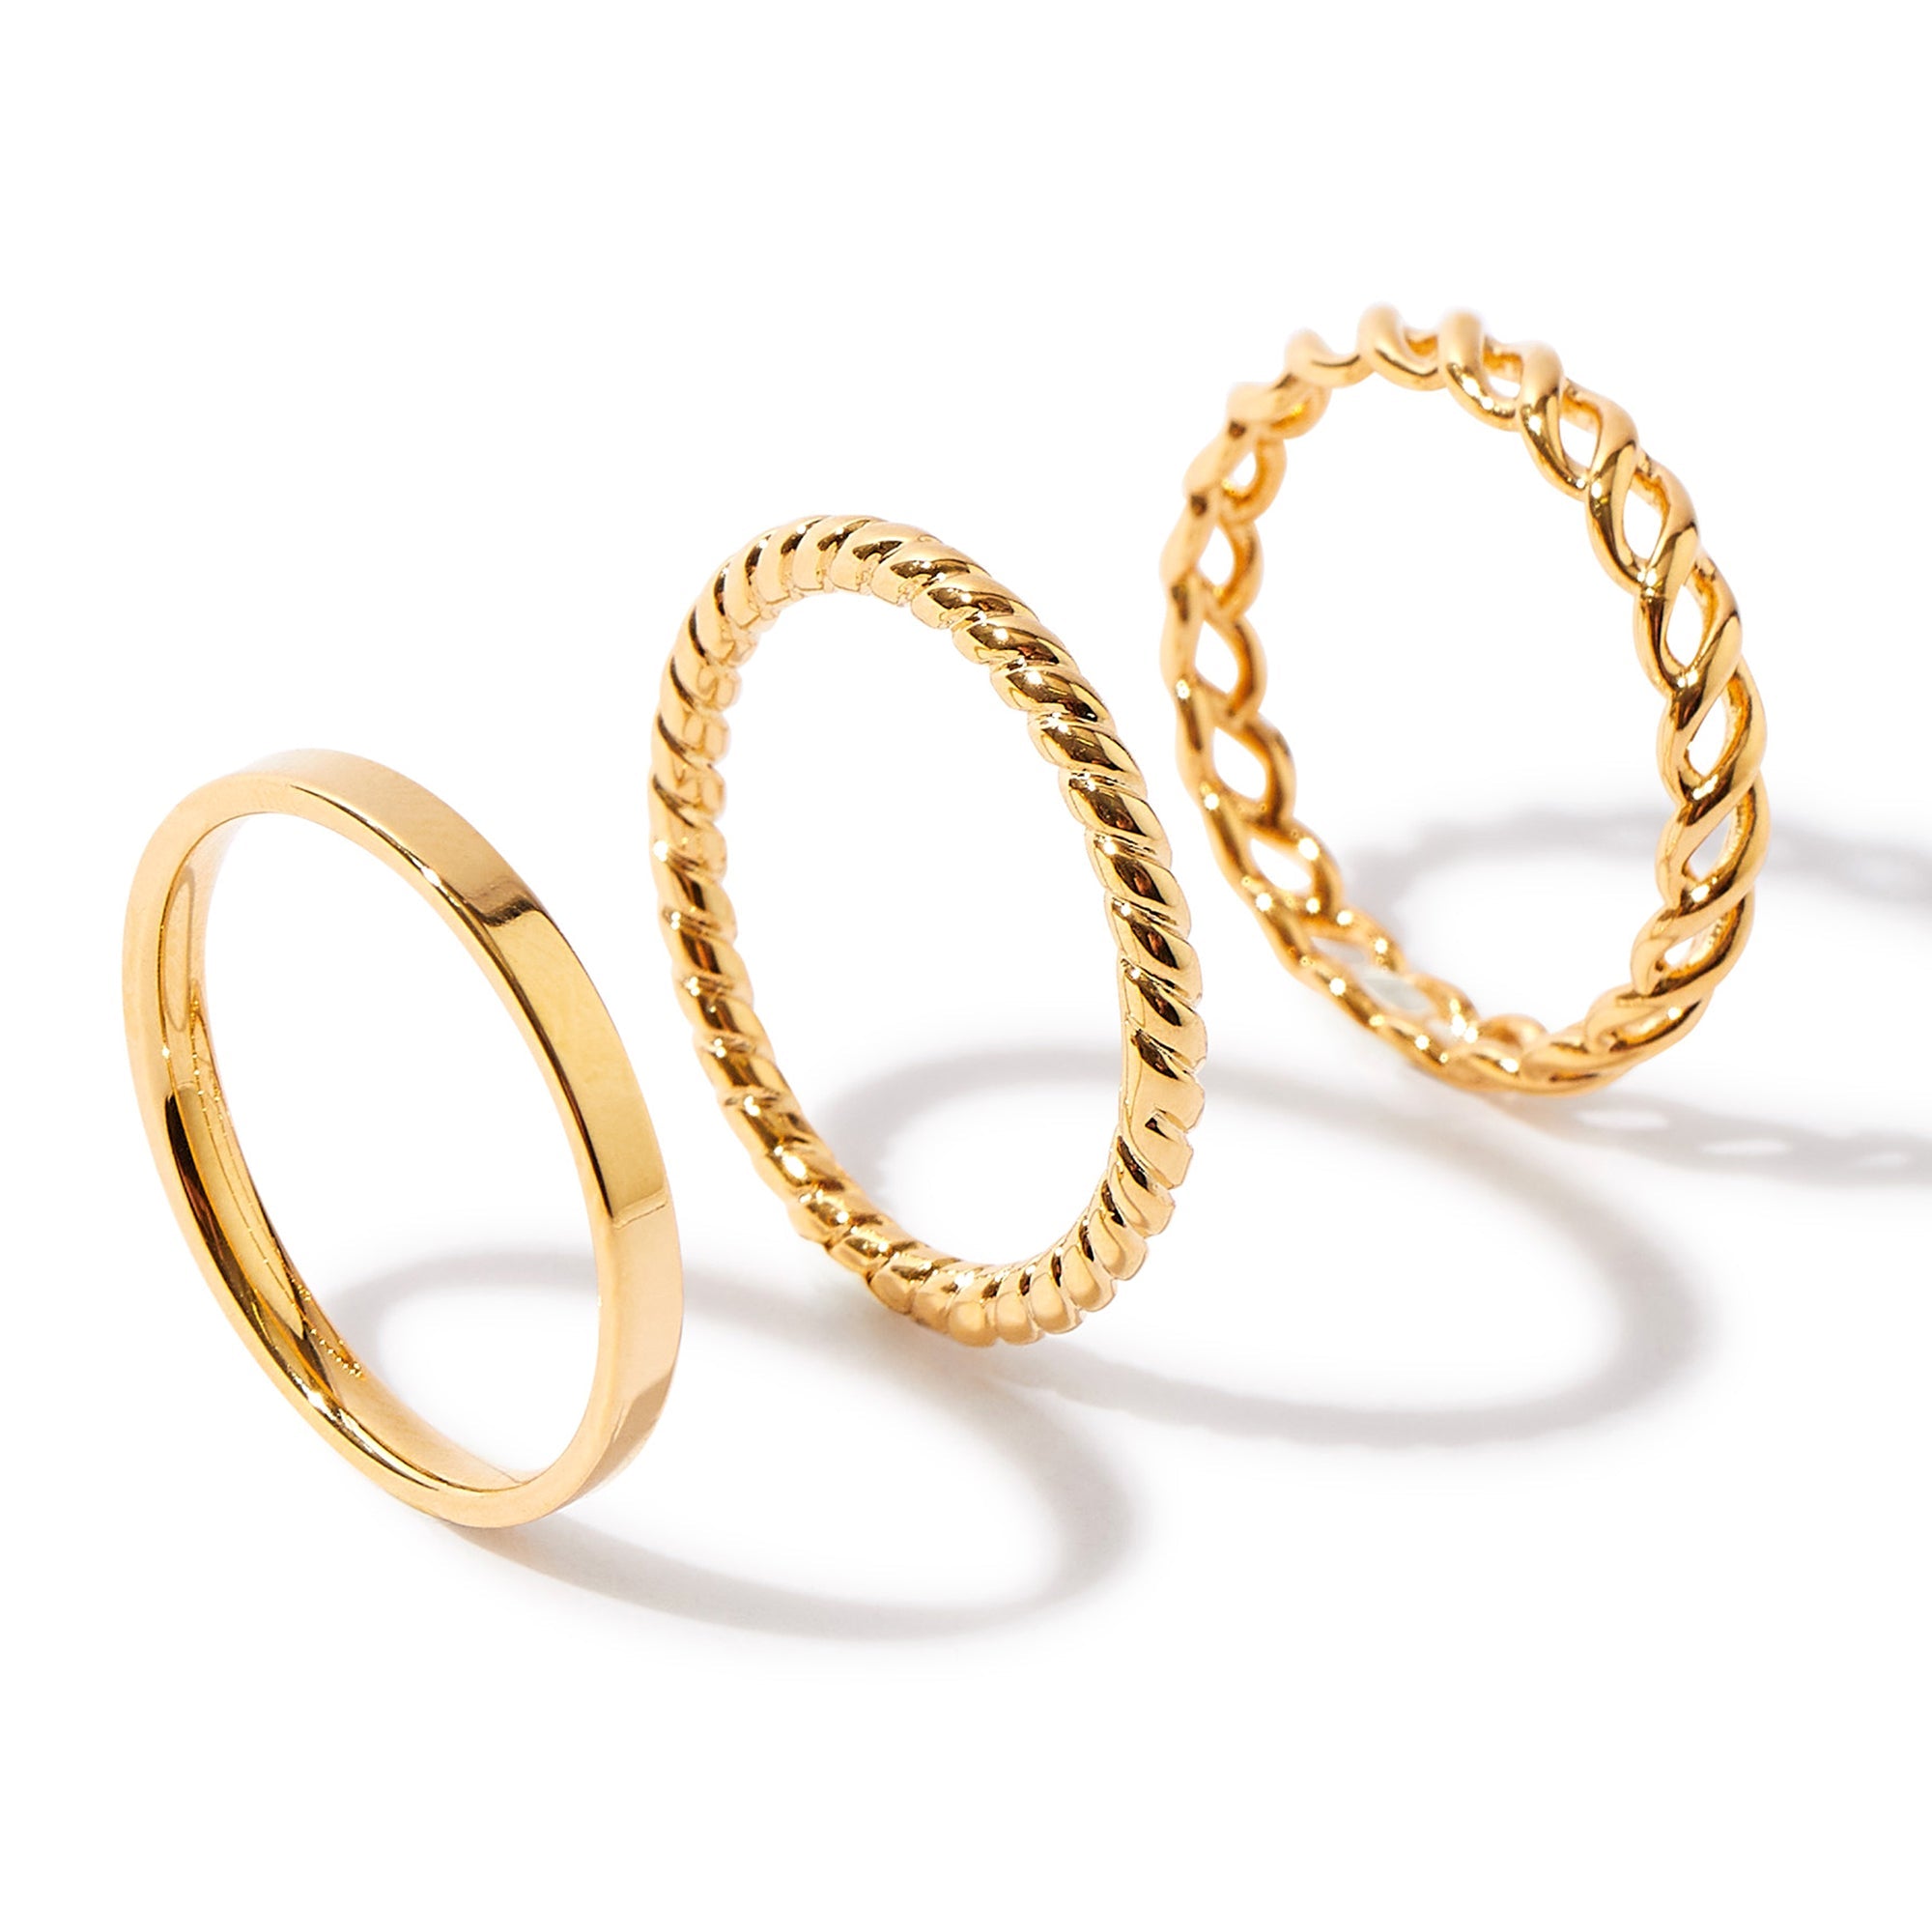 Rings for Women  Buy Women's Ring online - Accessorize India